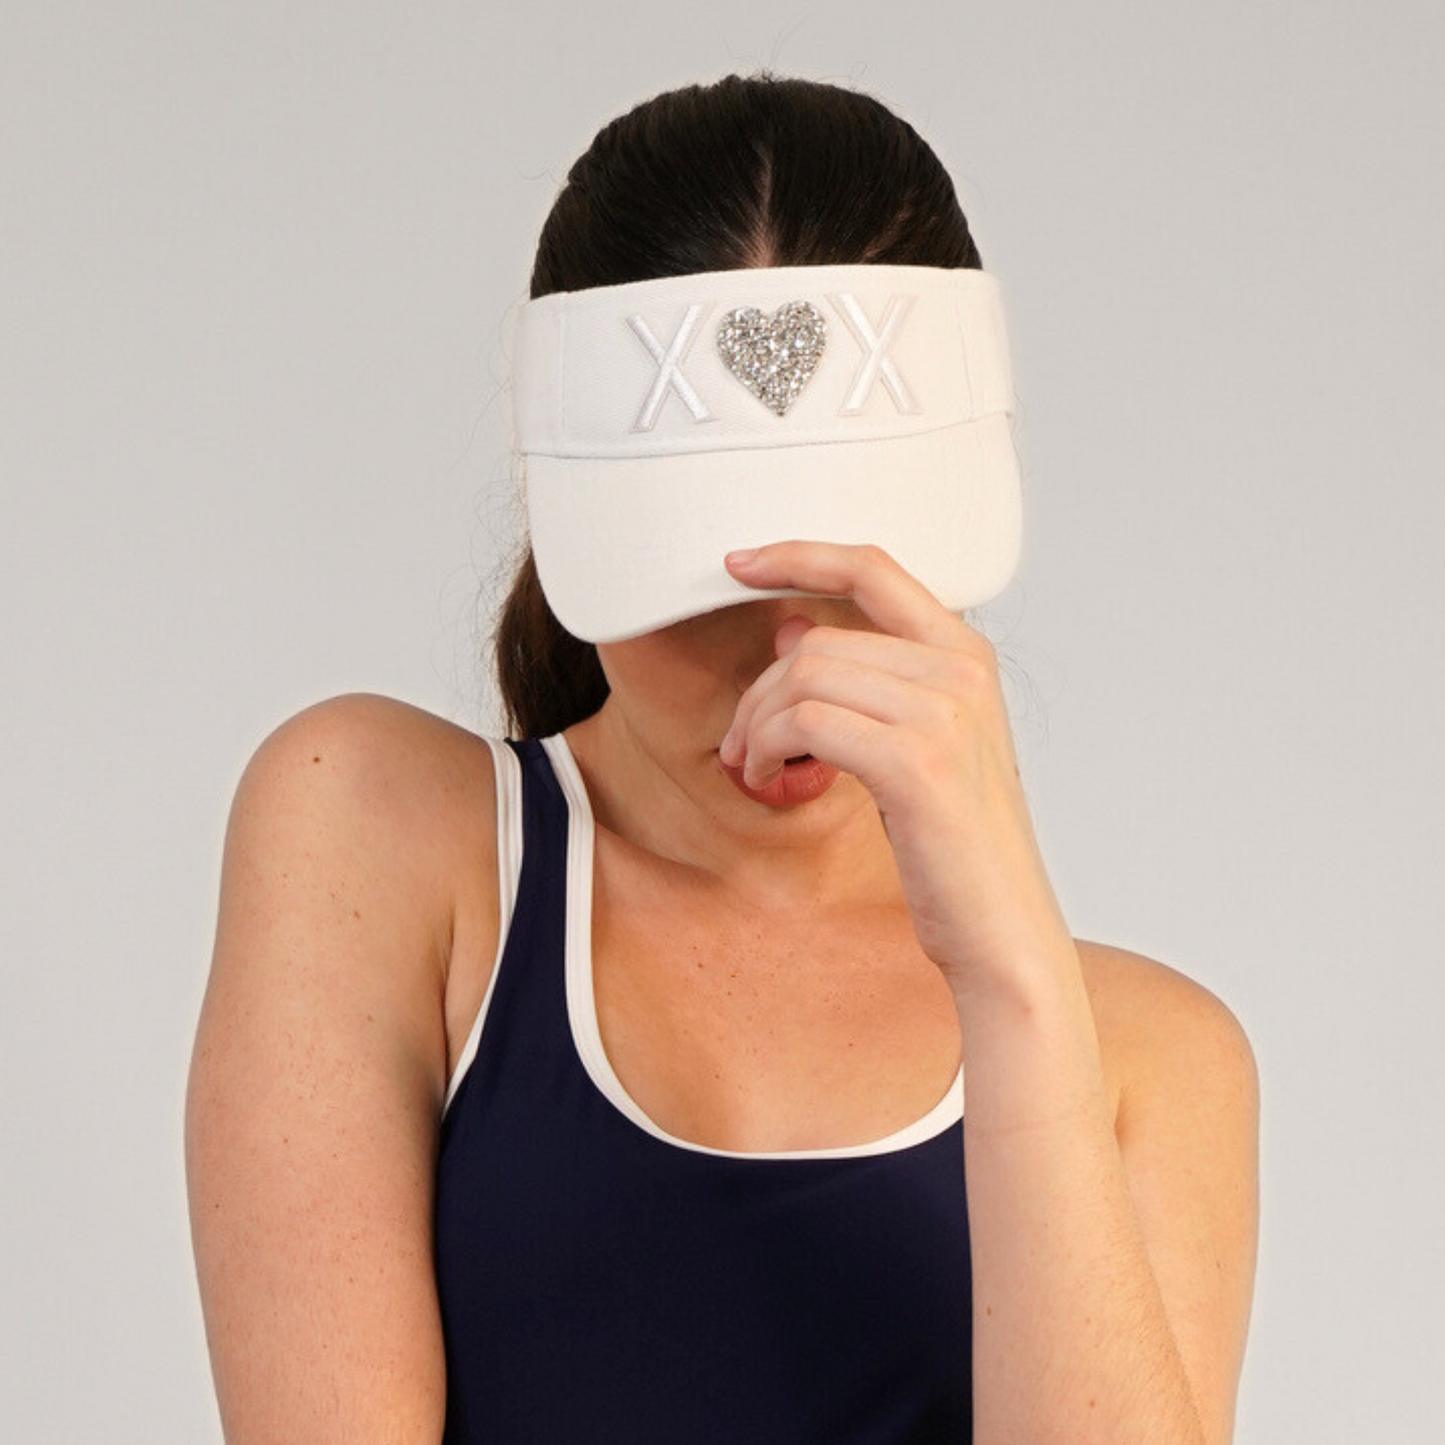 Word Visor XOX Sparkle Heart - White with White Letters